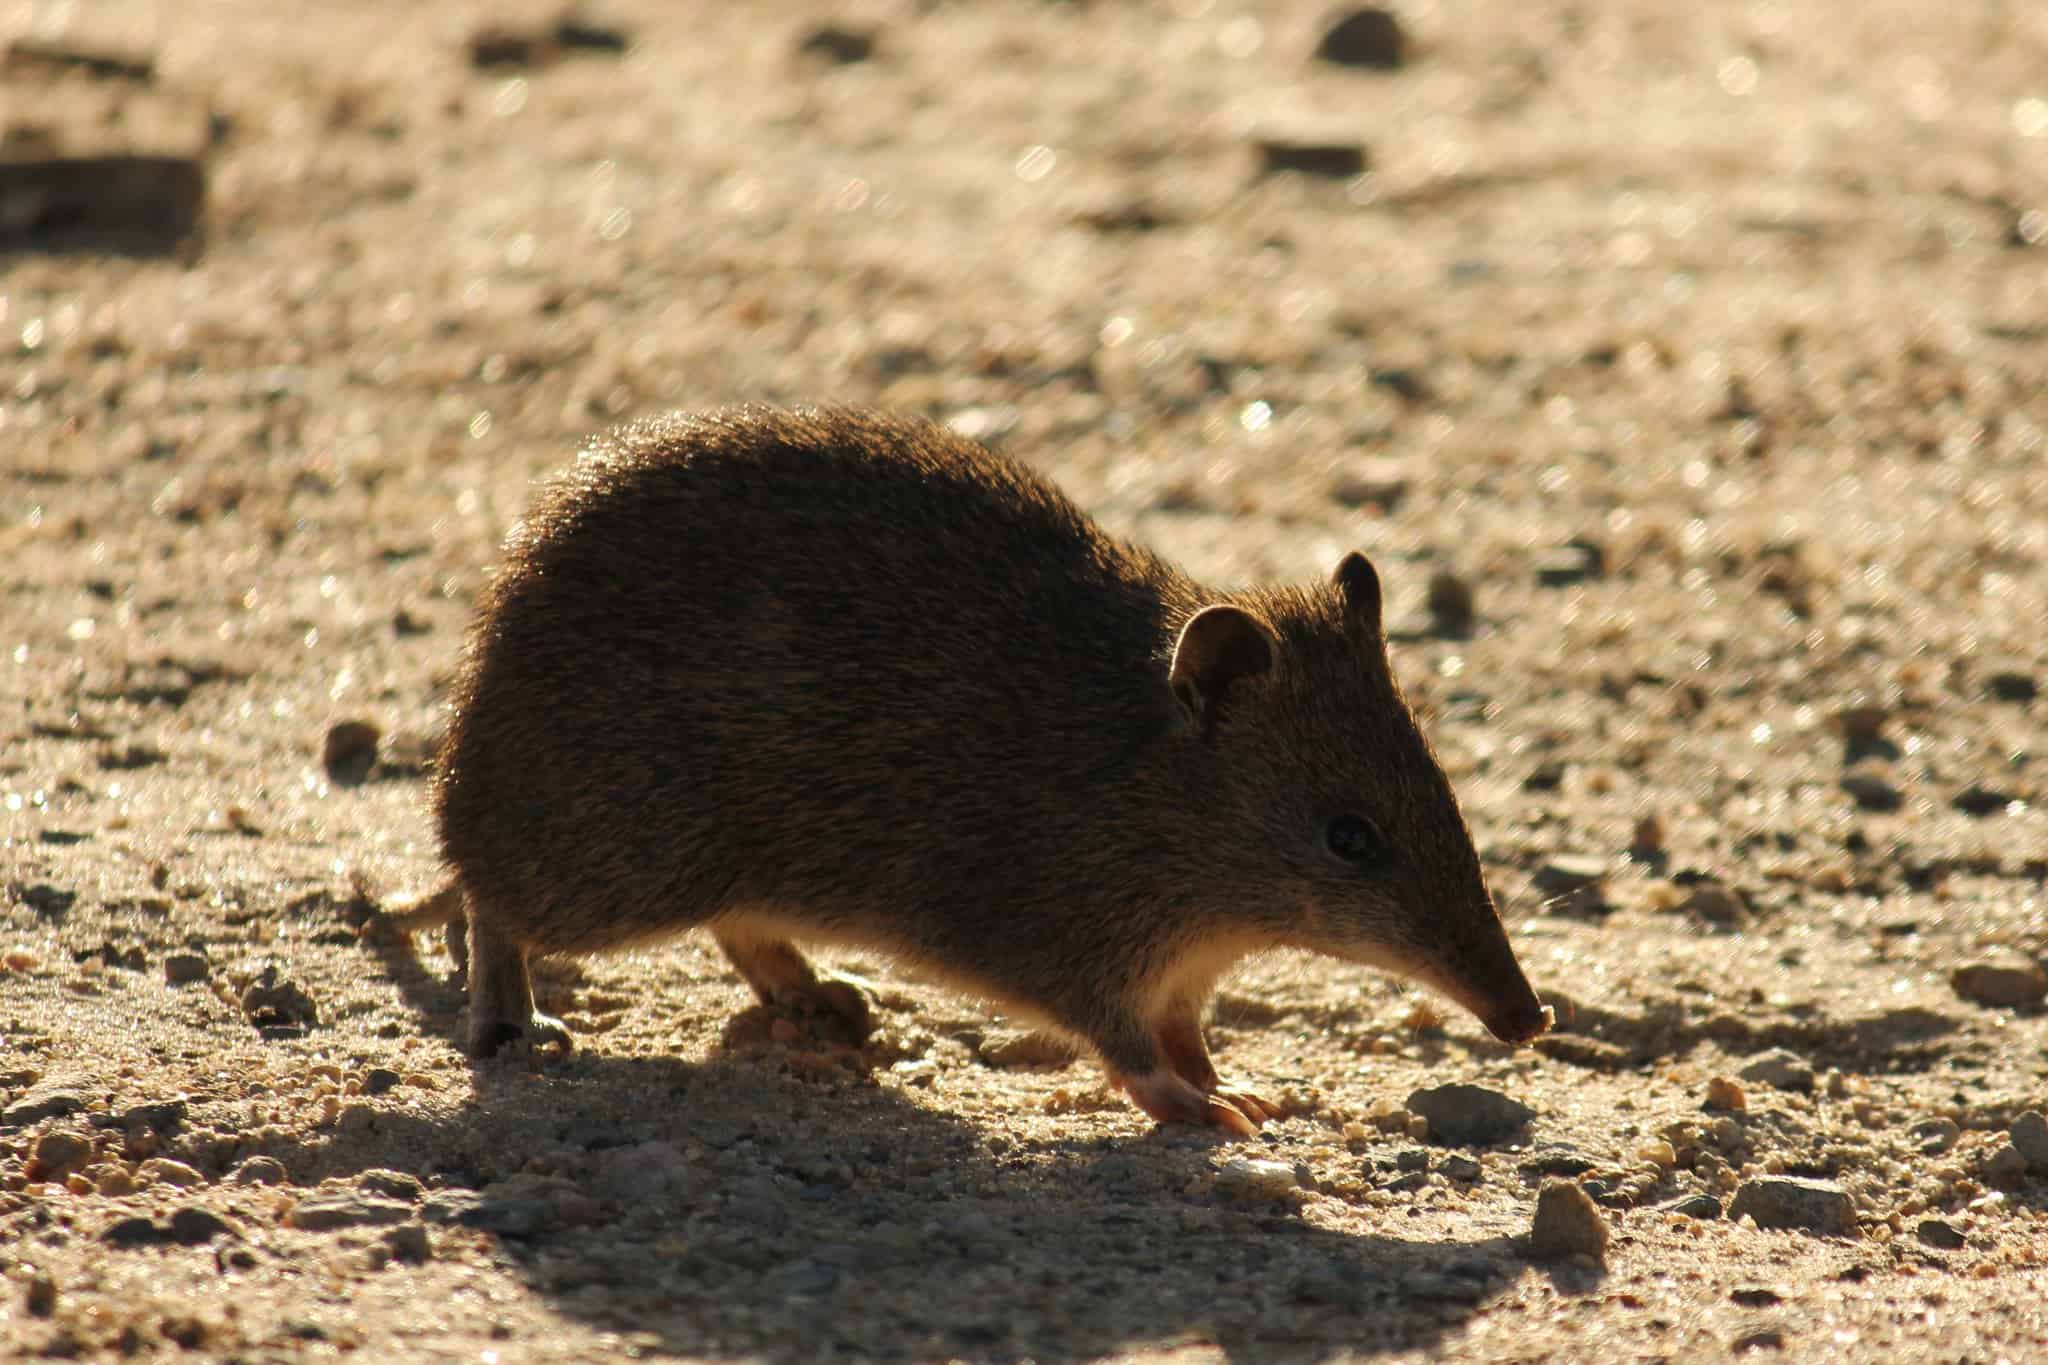 30 Bandicoot Facts About These Solitary Marsupials 